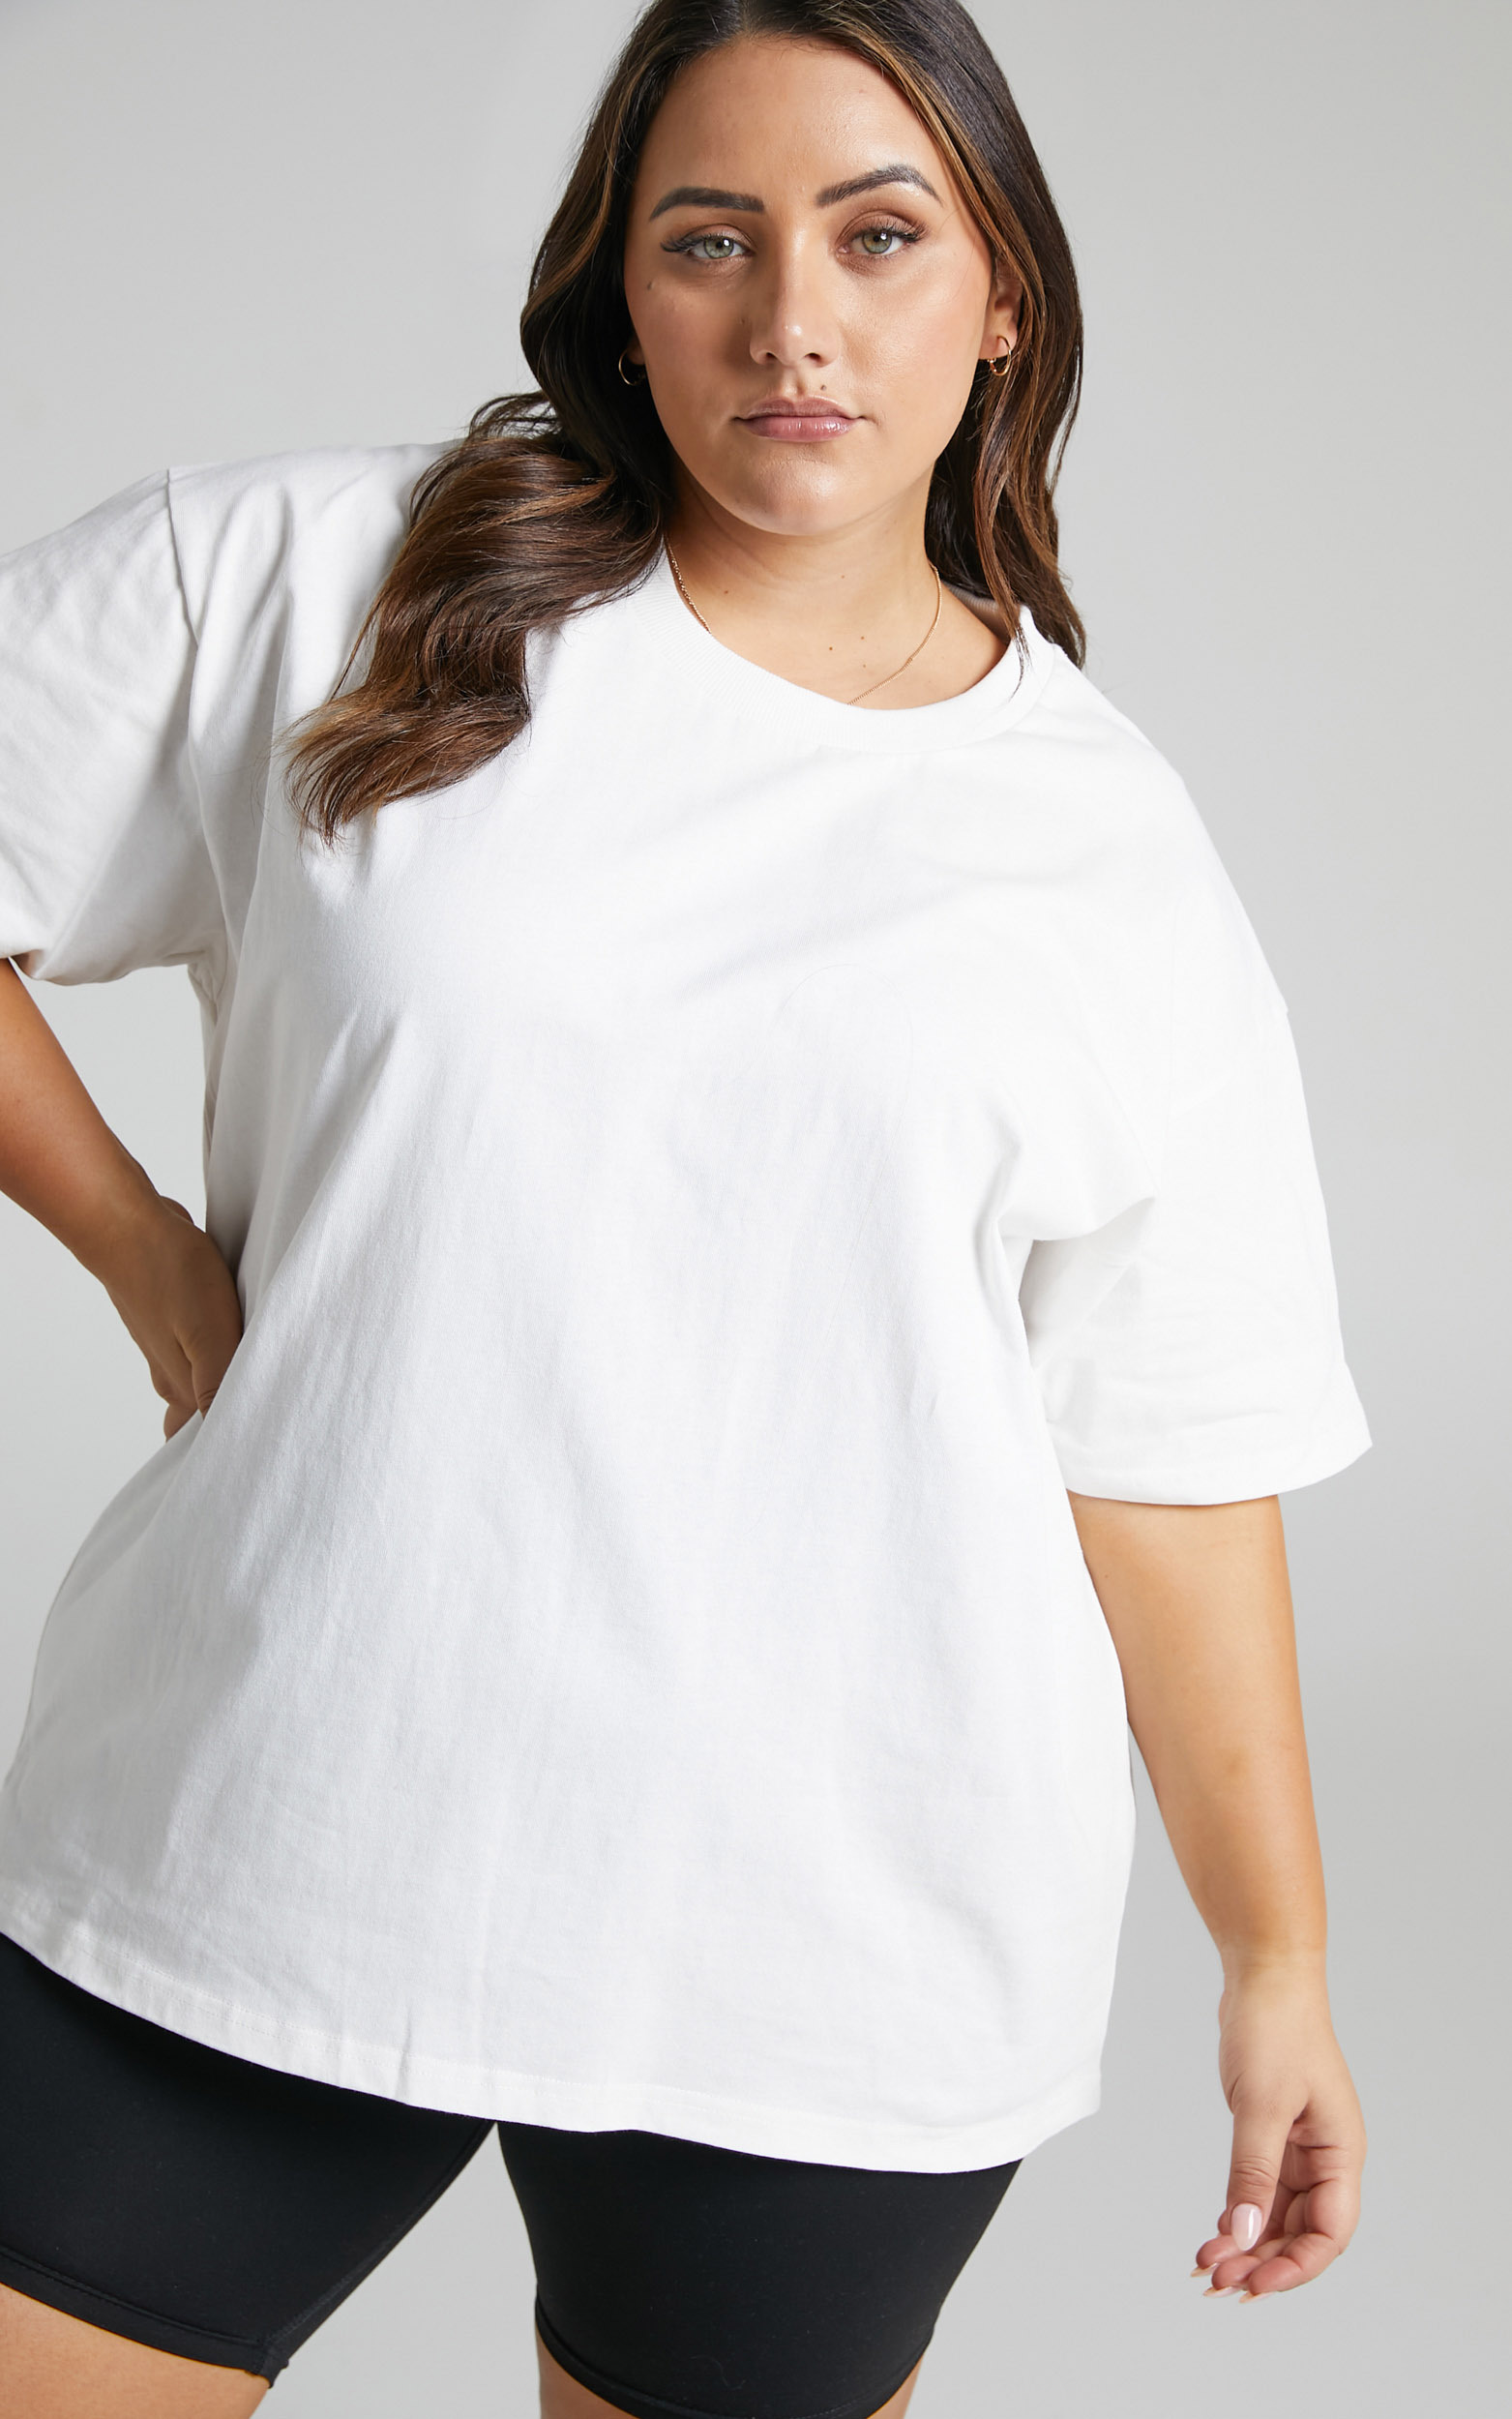 Prizza Longline Boyfriend Tee in White - 04, WHT3, hi-res image number null